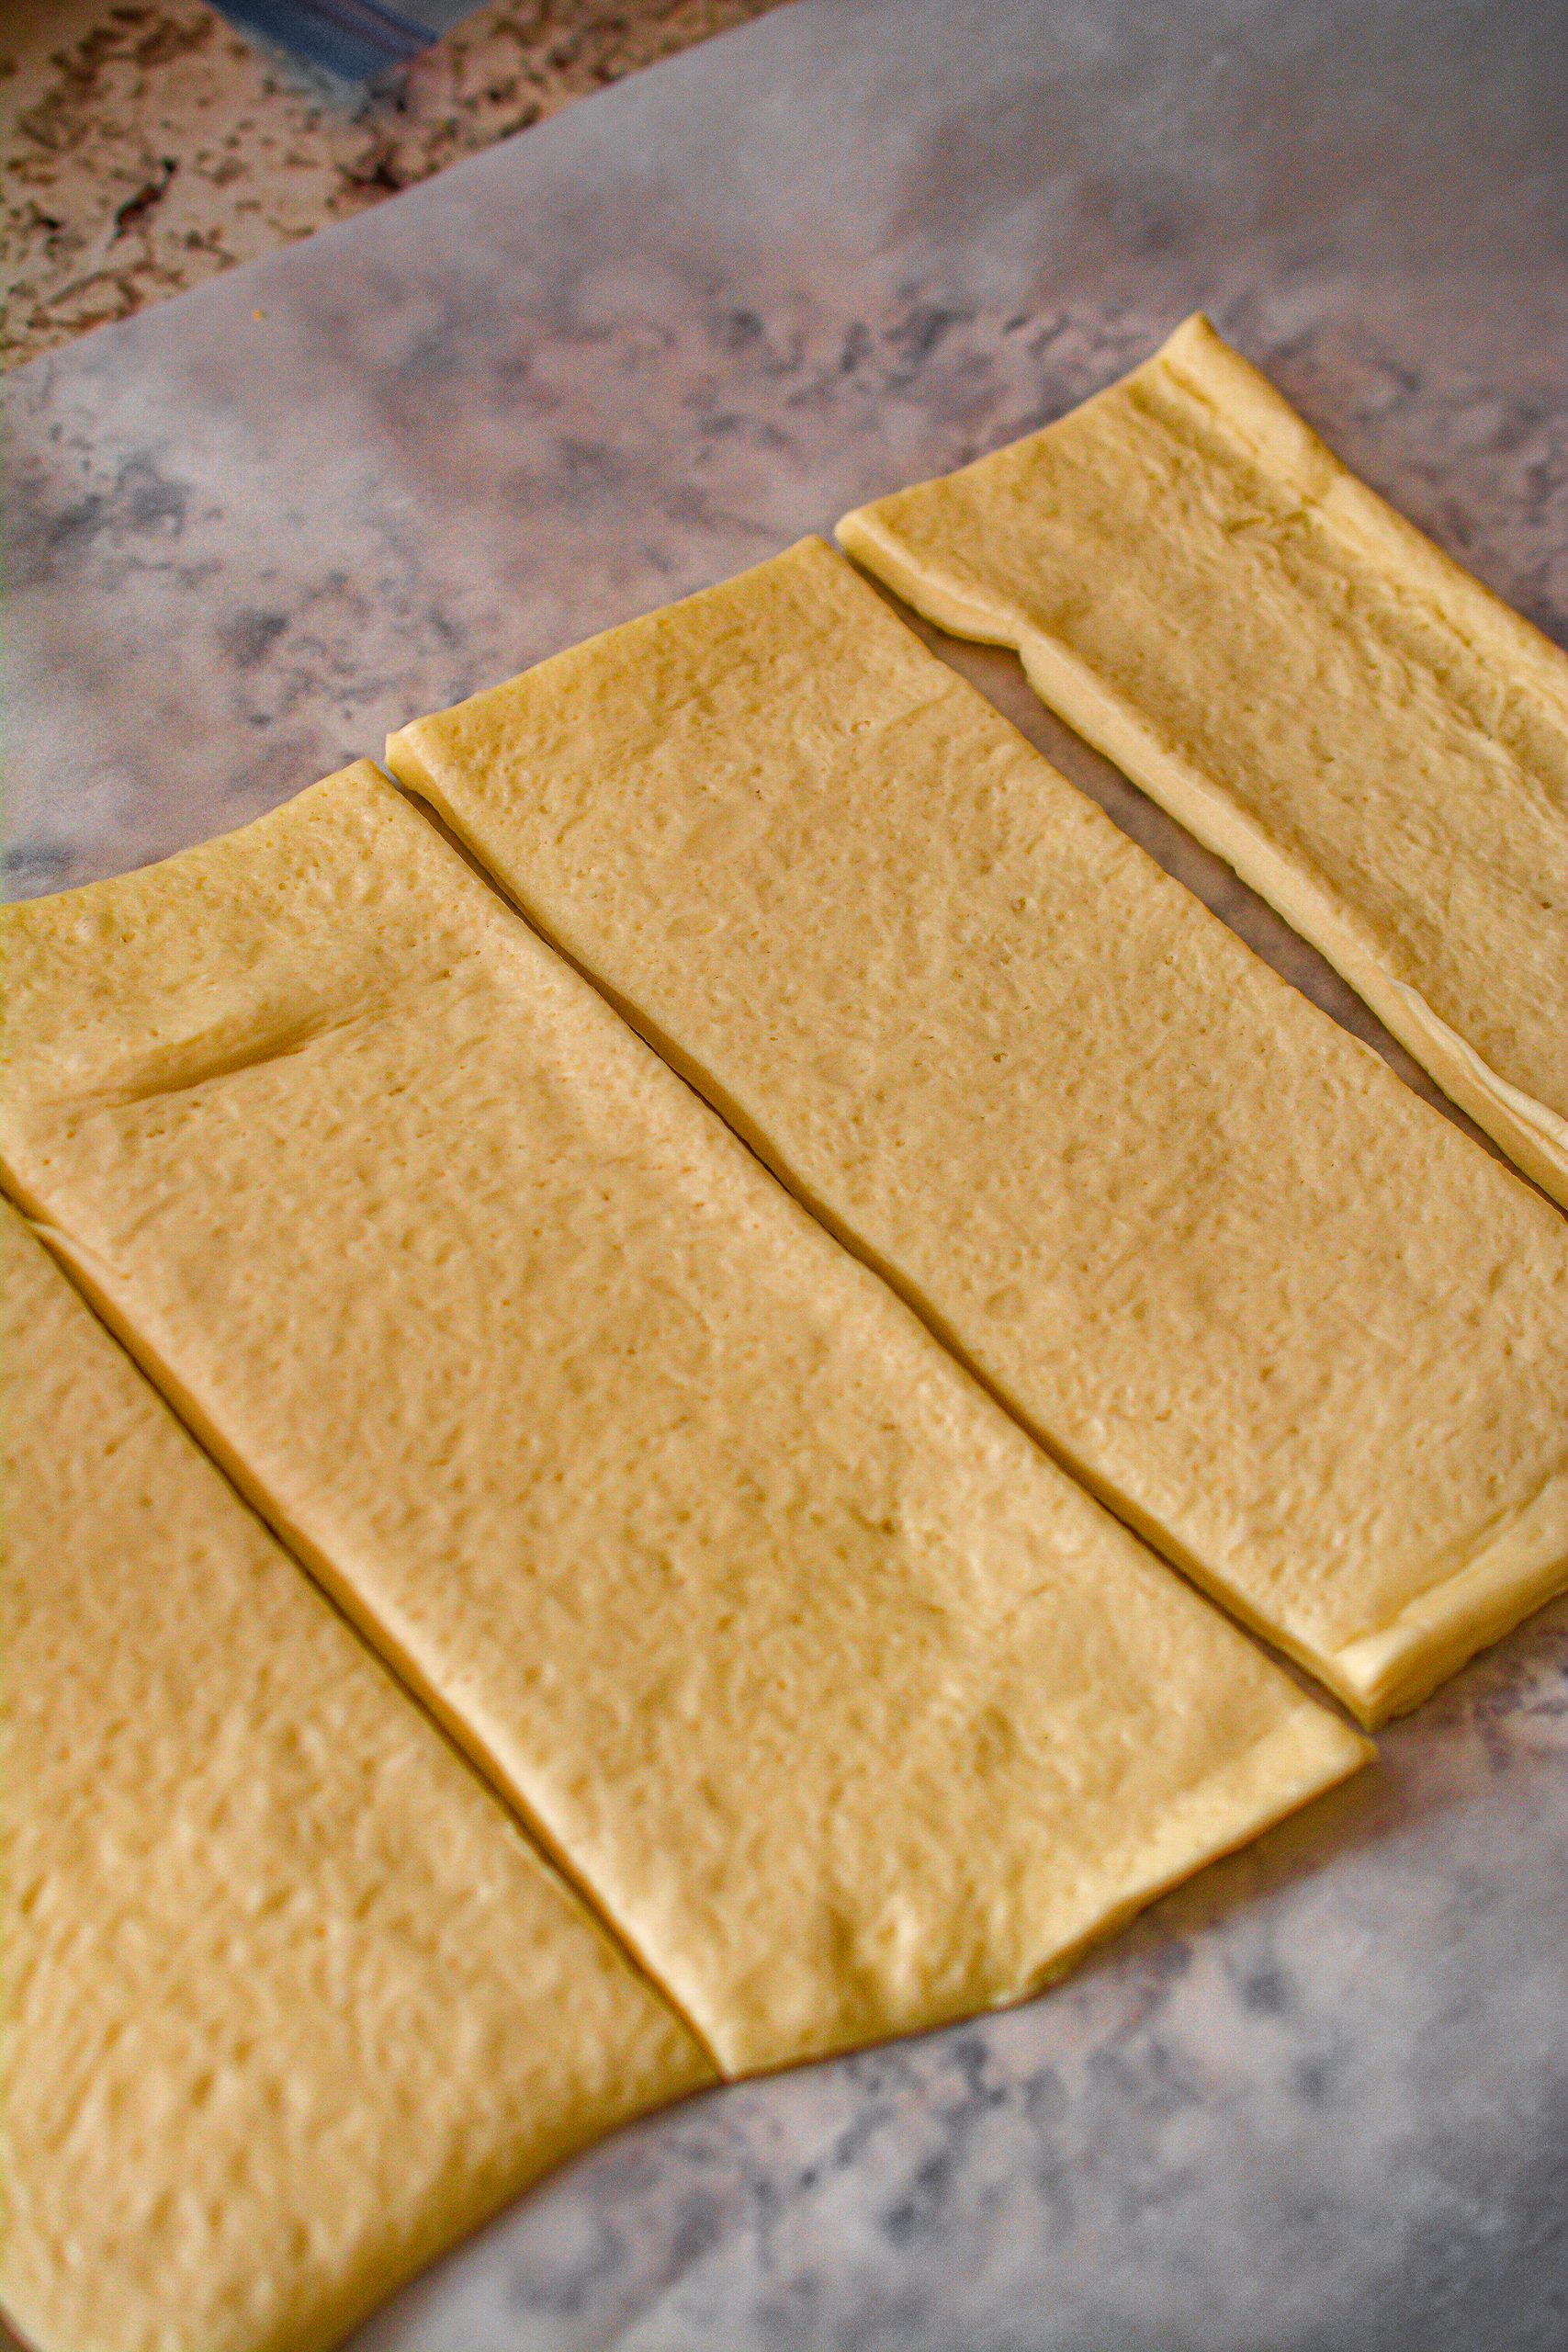 Roll out the pizza dough and slice it into 4 even rectangular pieces.